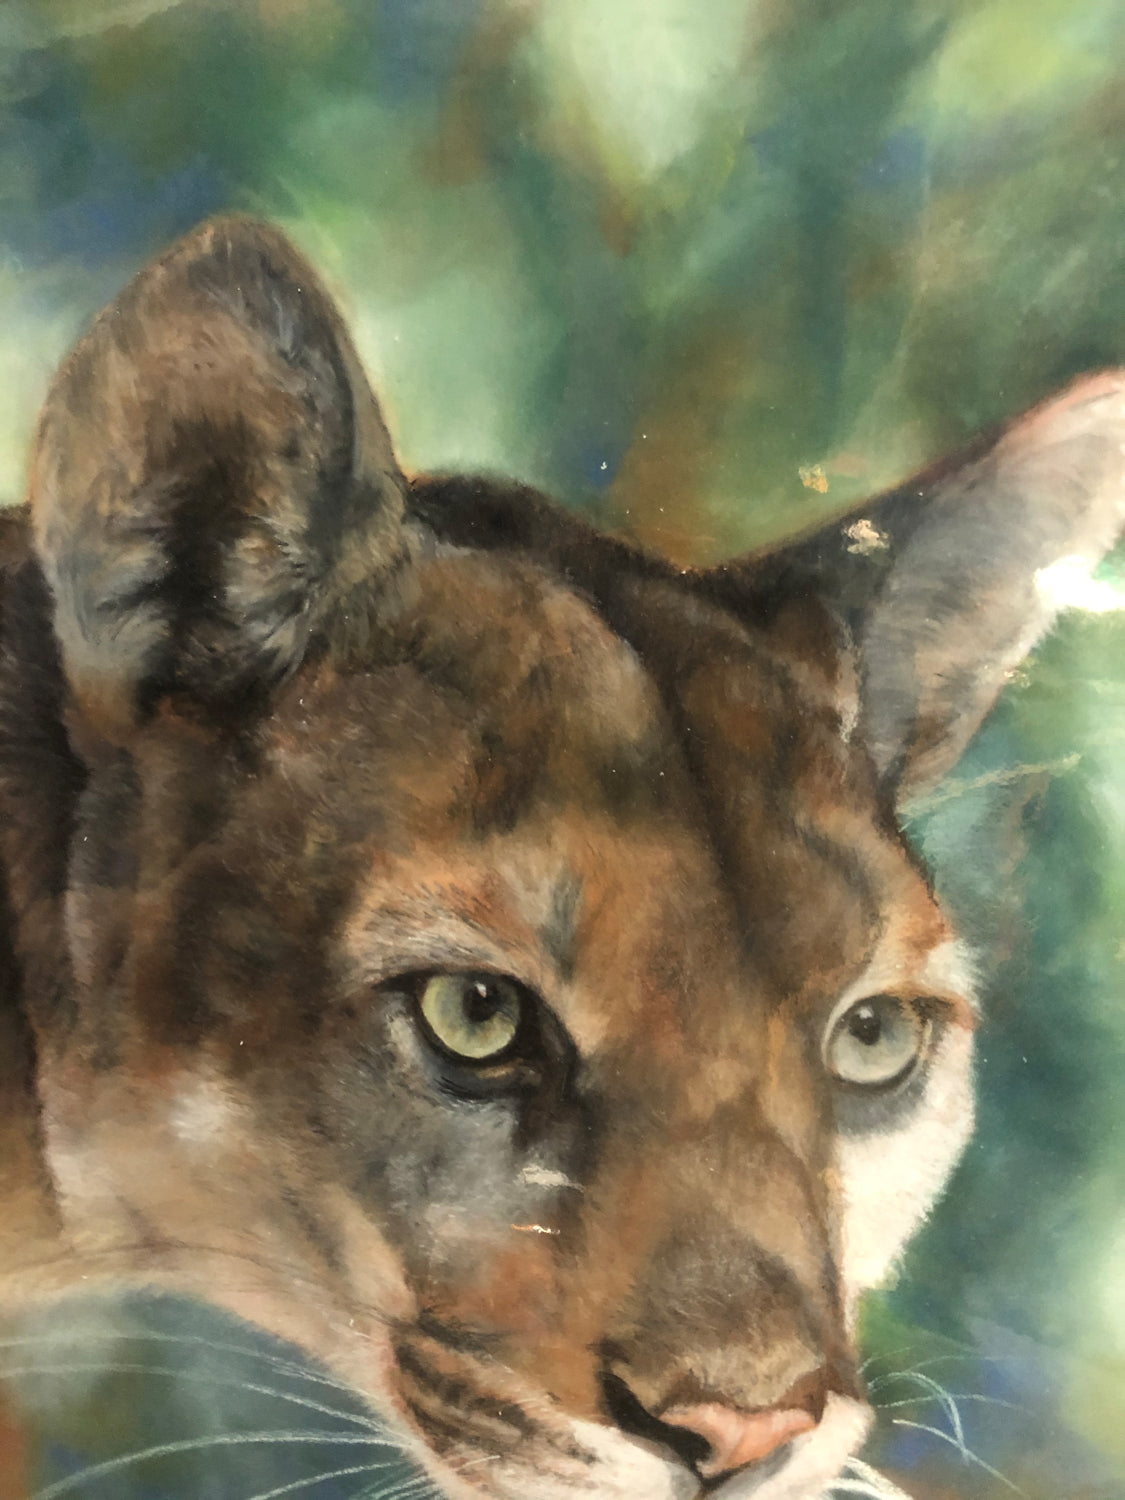 Original Pastel by Elaine Reaume, Signed on acid free paper:The Endangered Eastern Cougar